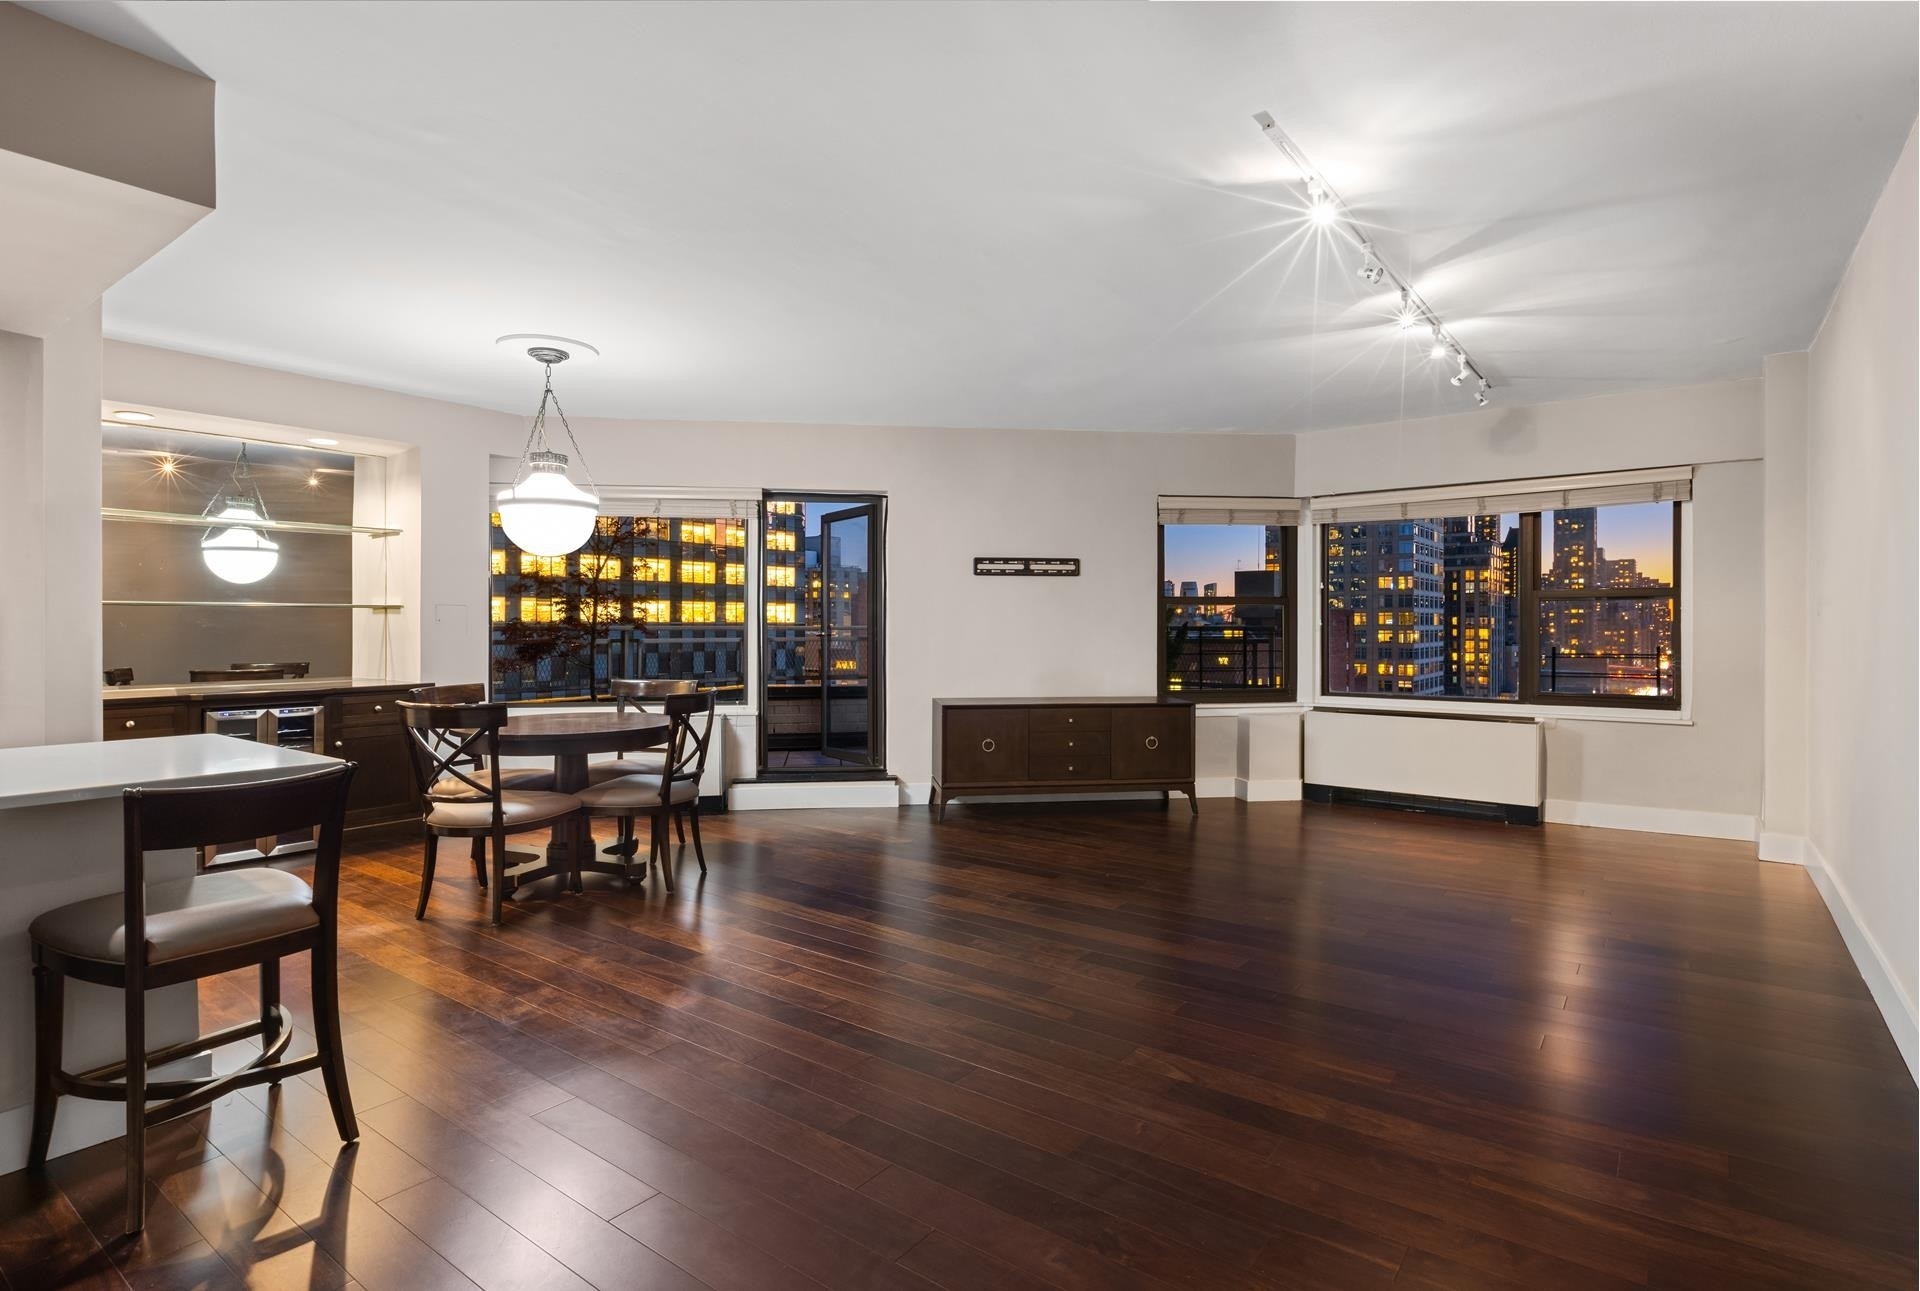 12. Co-op Properties for Sale at 345 E 69TH ST, PHC Lenox Hill, New York, NY 10021